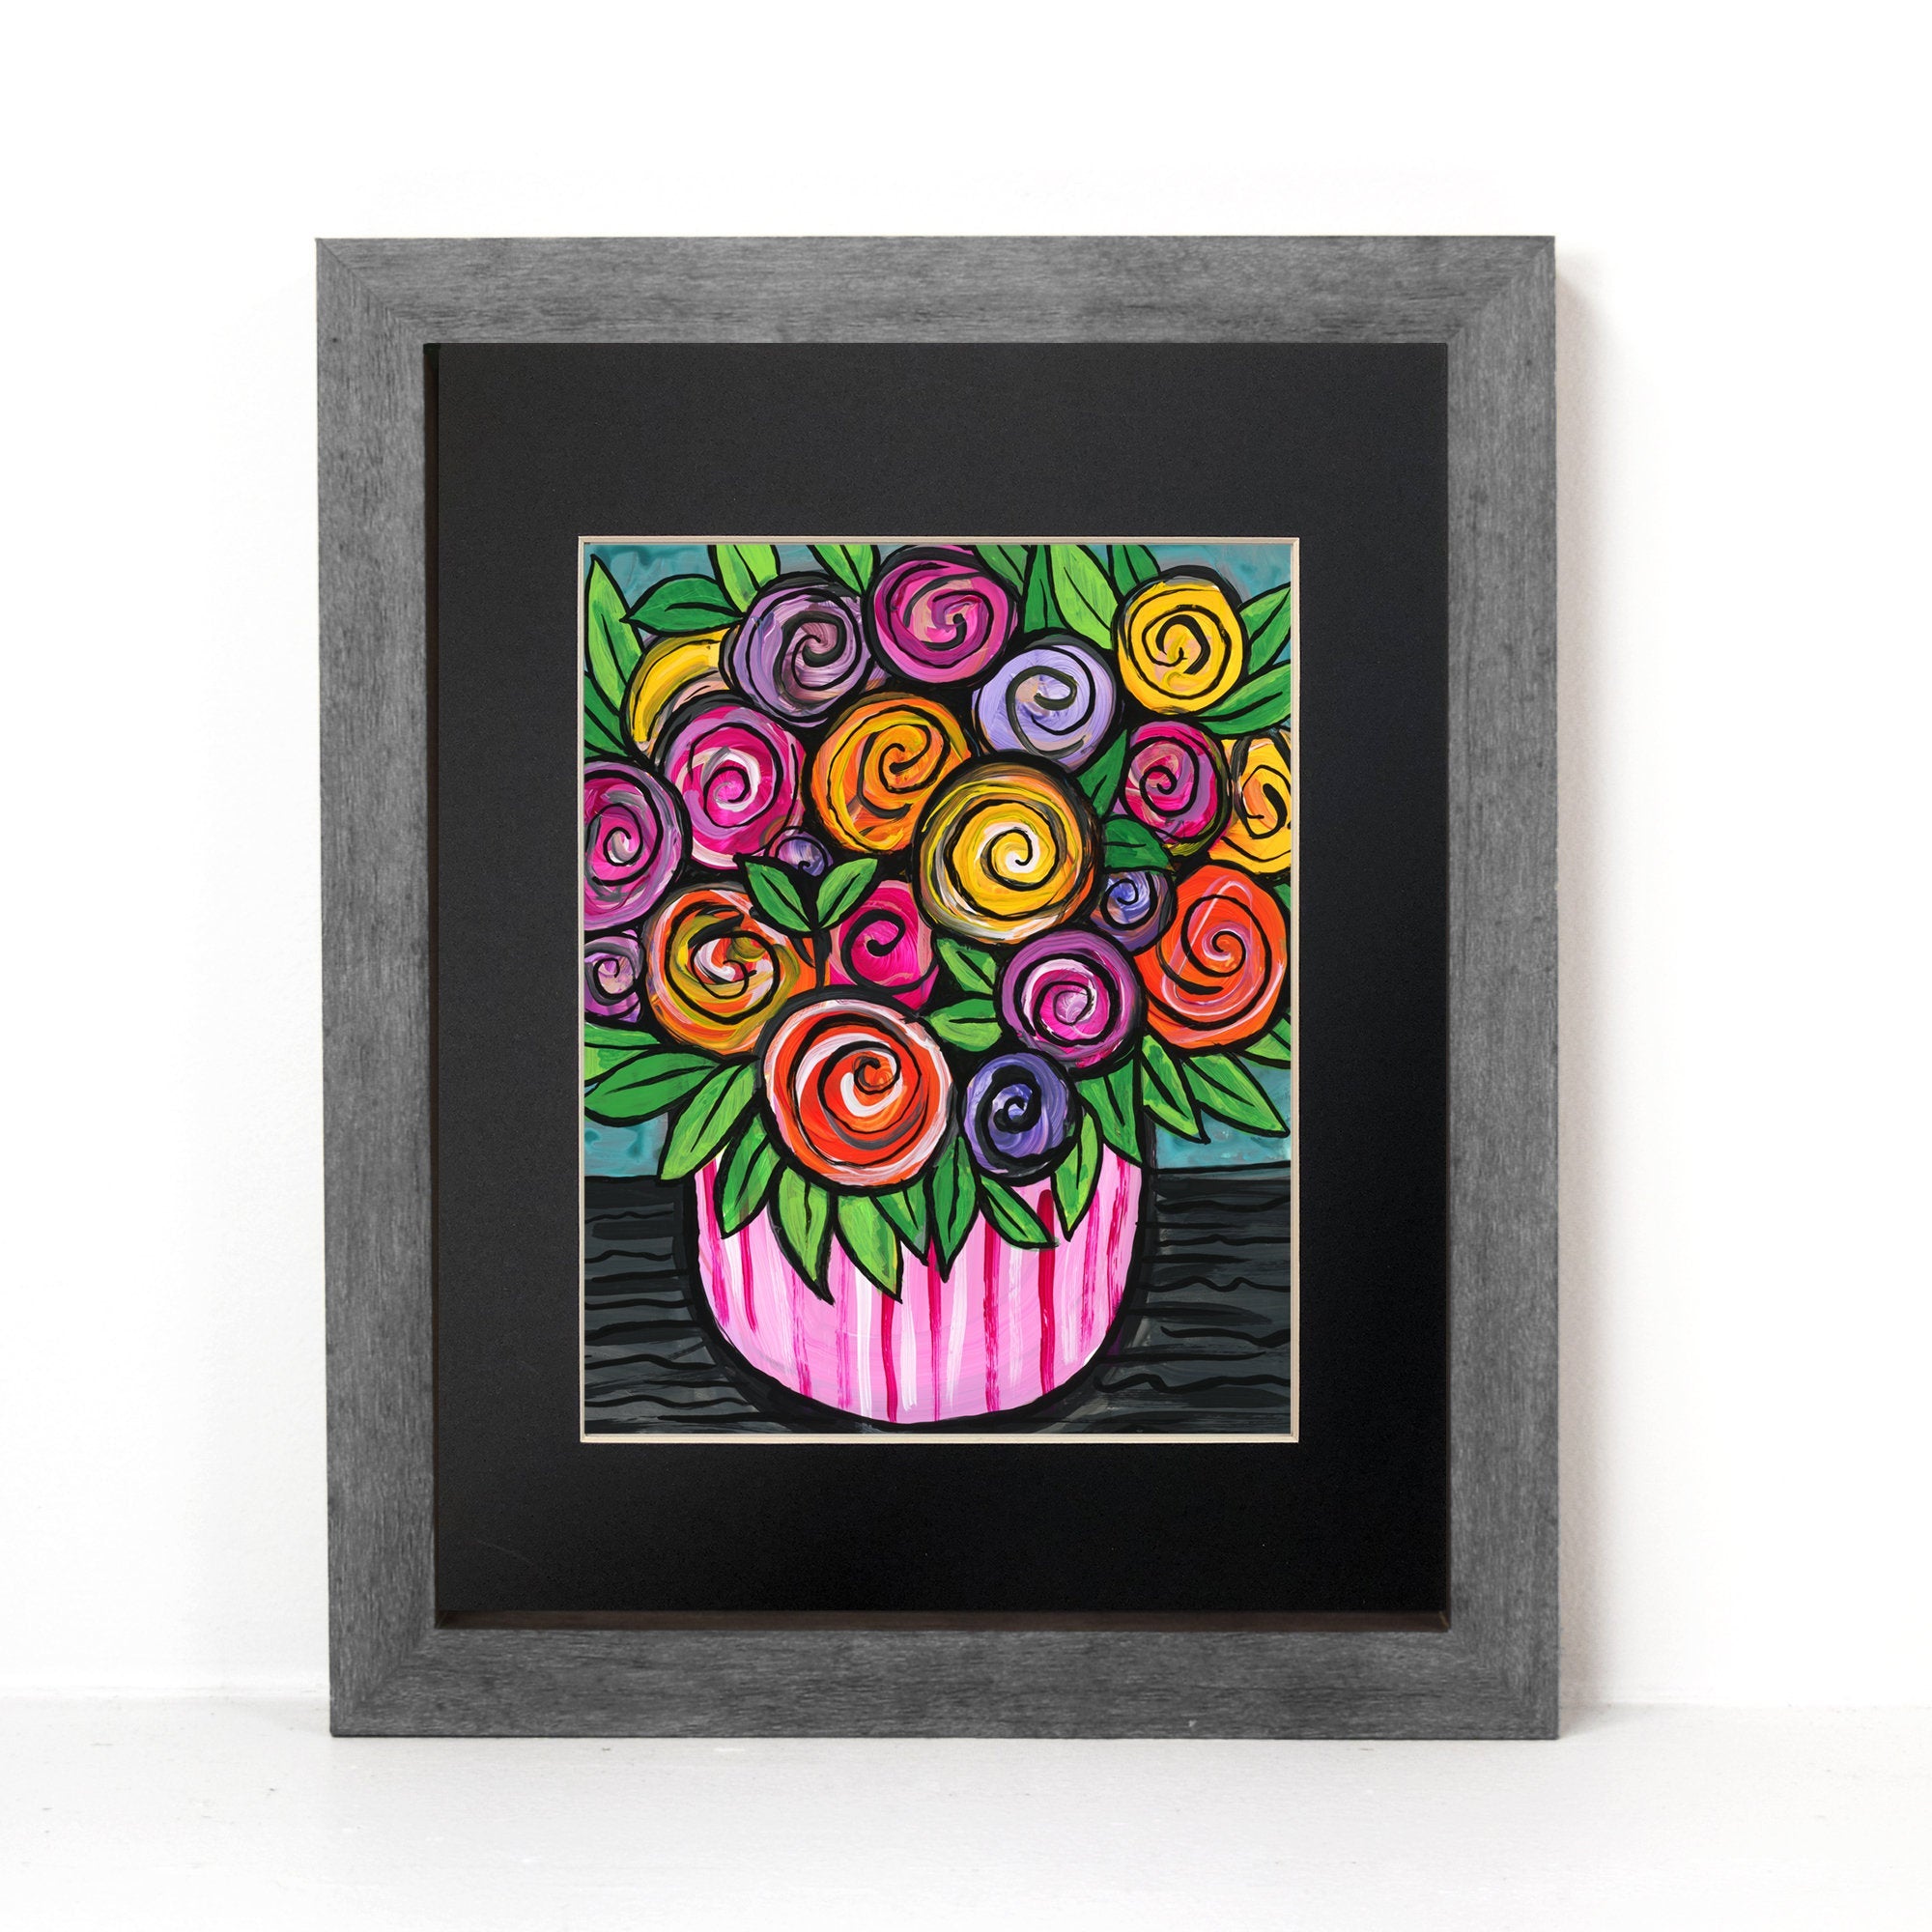 Bowl of Roses Print - Colorful Rose Art - Whimsical Floral Still Life - 8x10 with Optional Black Mat by Claudine Intner